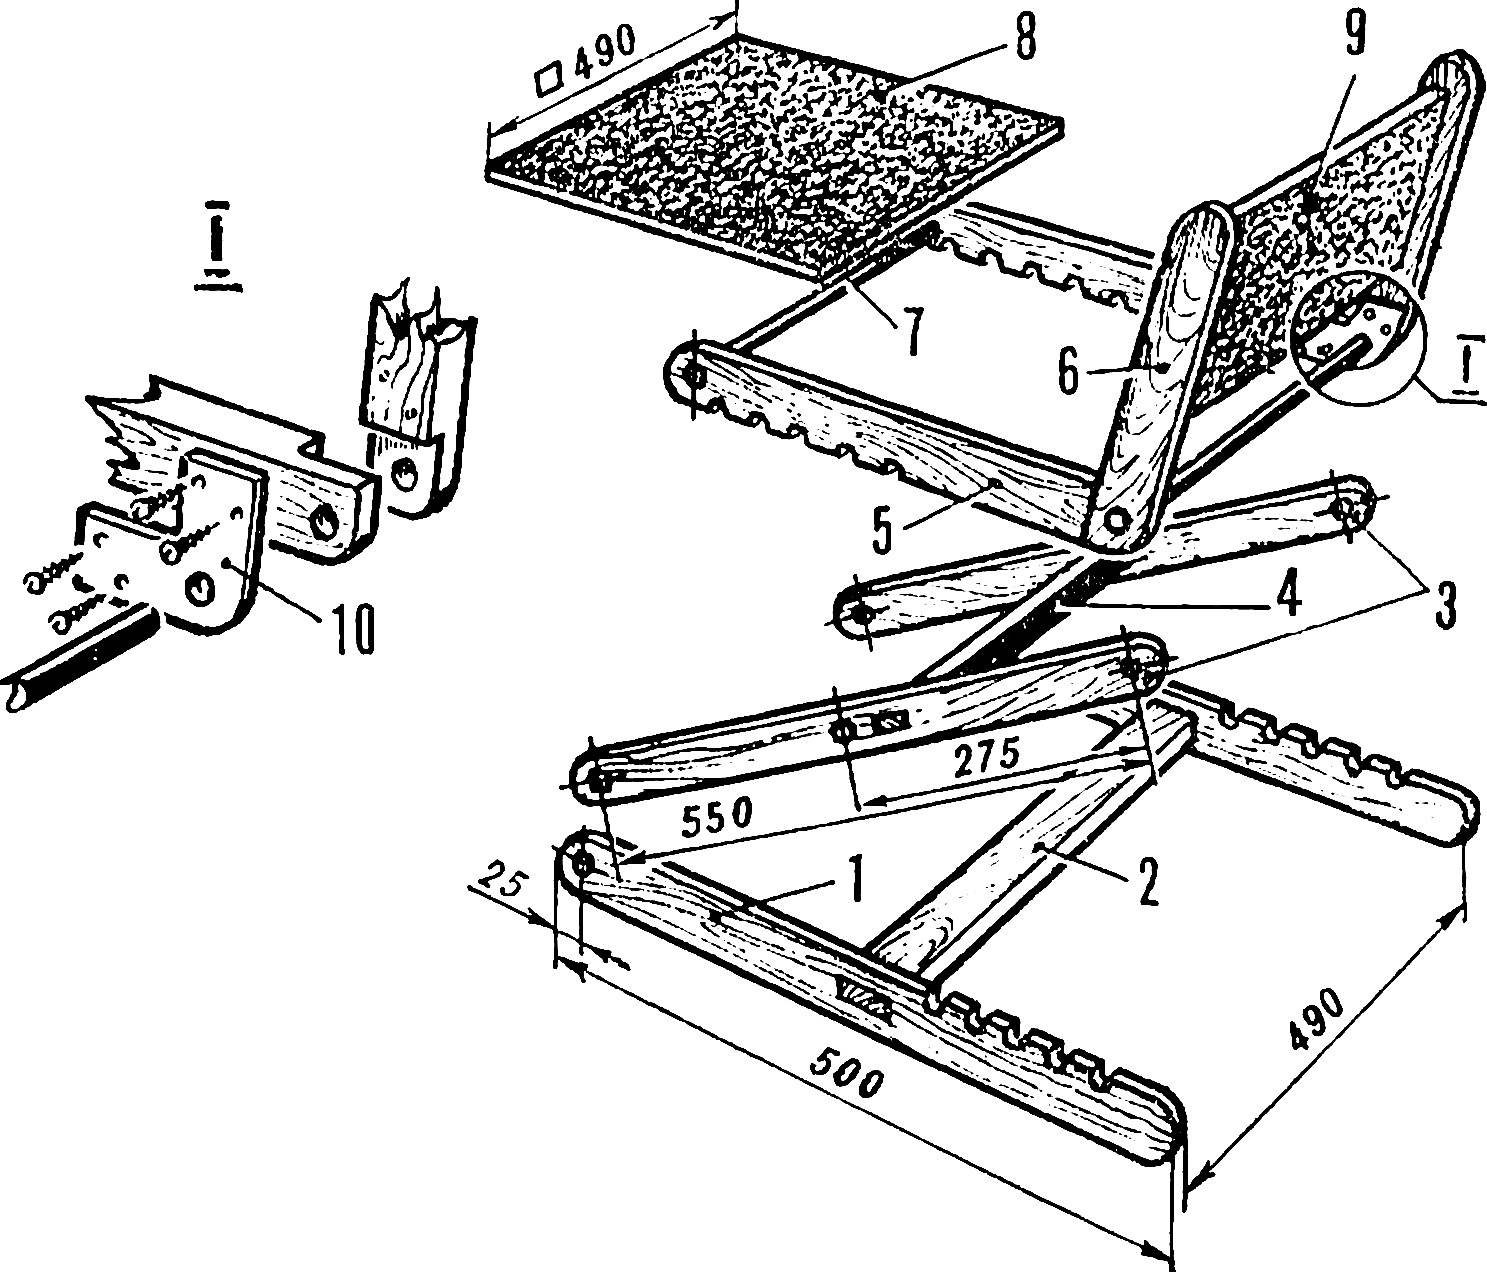 Fig. 2. Parts of the chair.